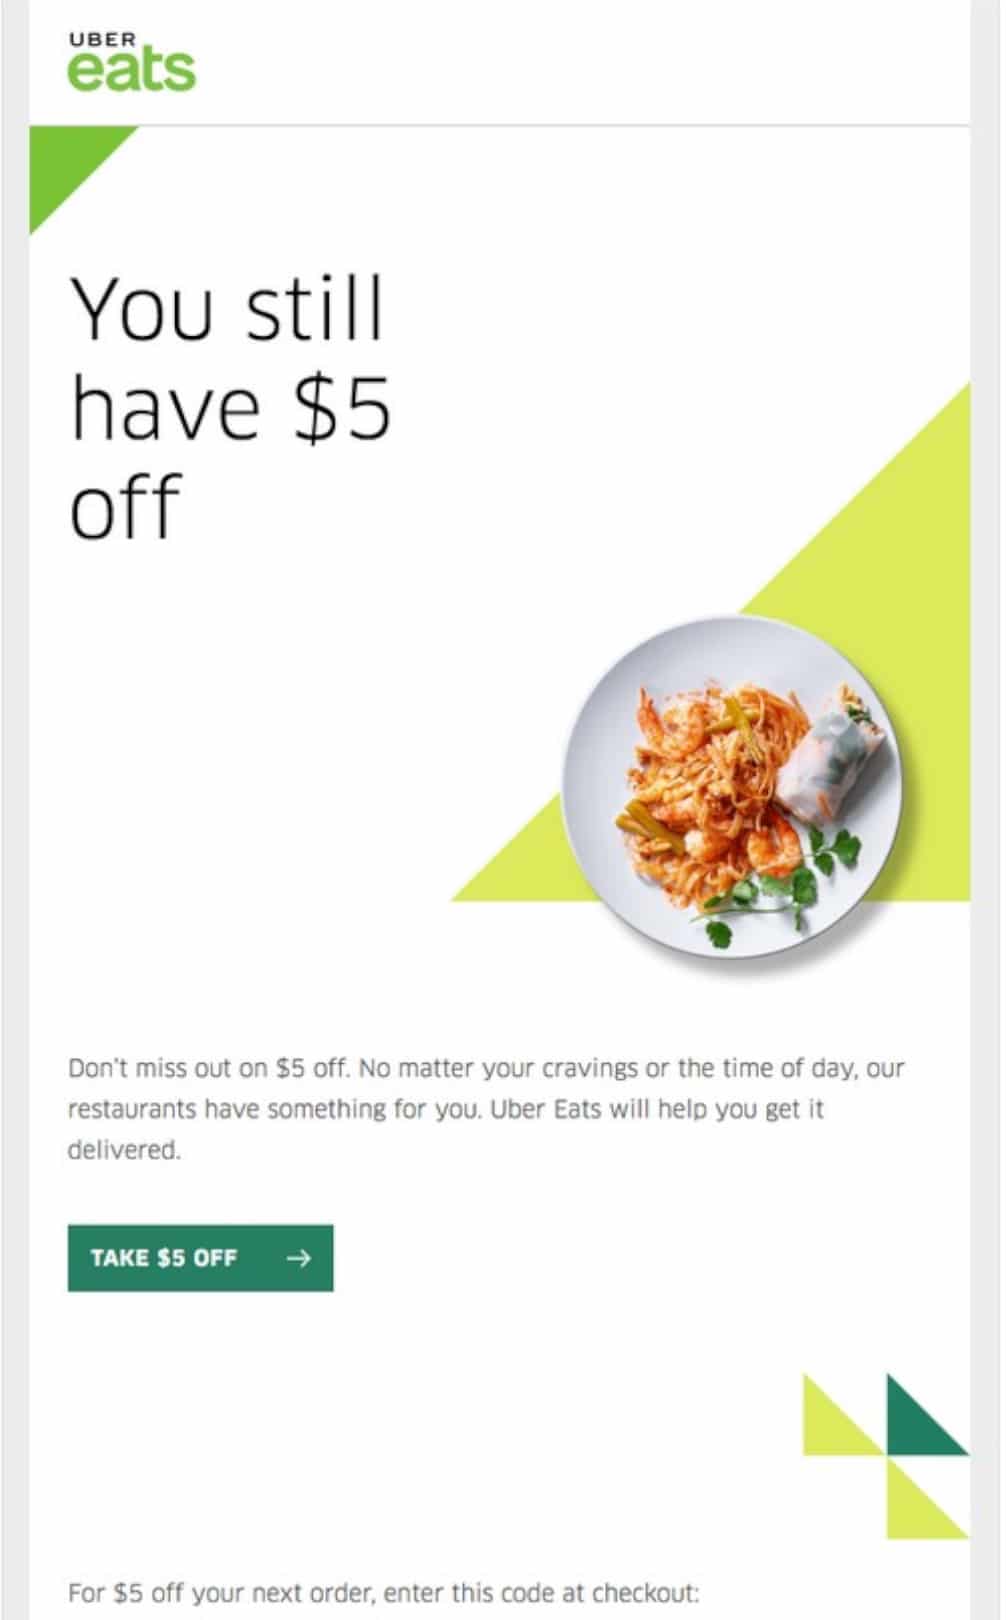 A bold CTA should be an important component of an incentive email.